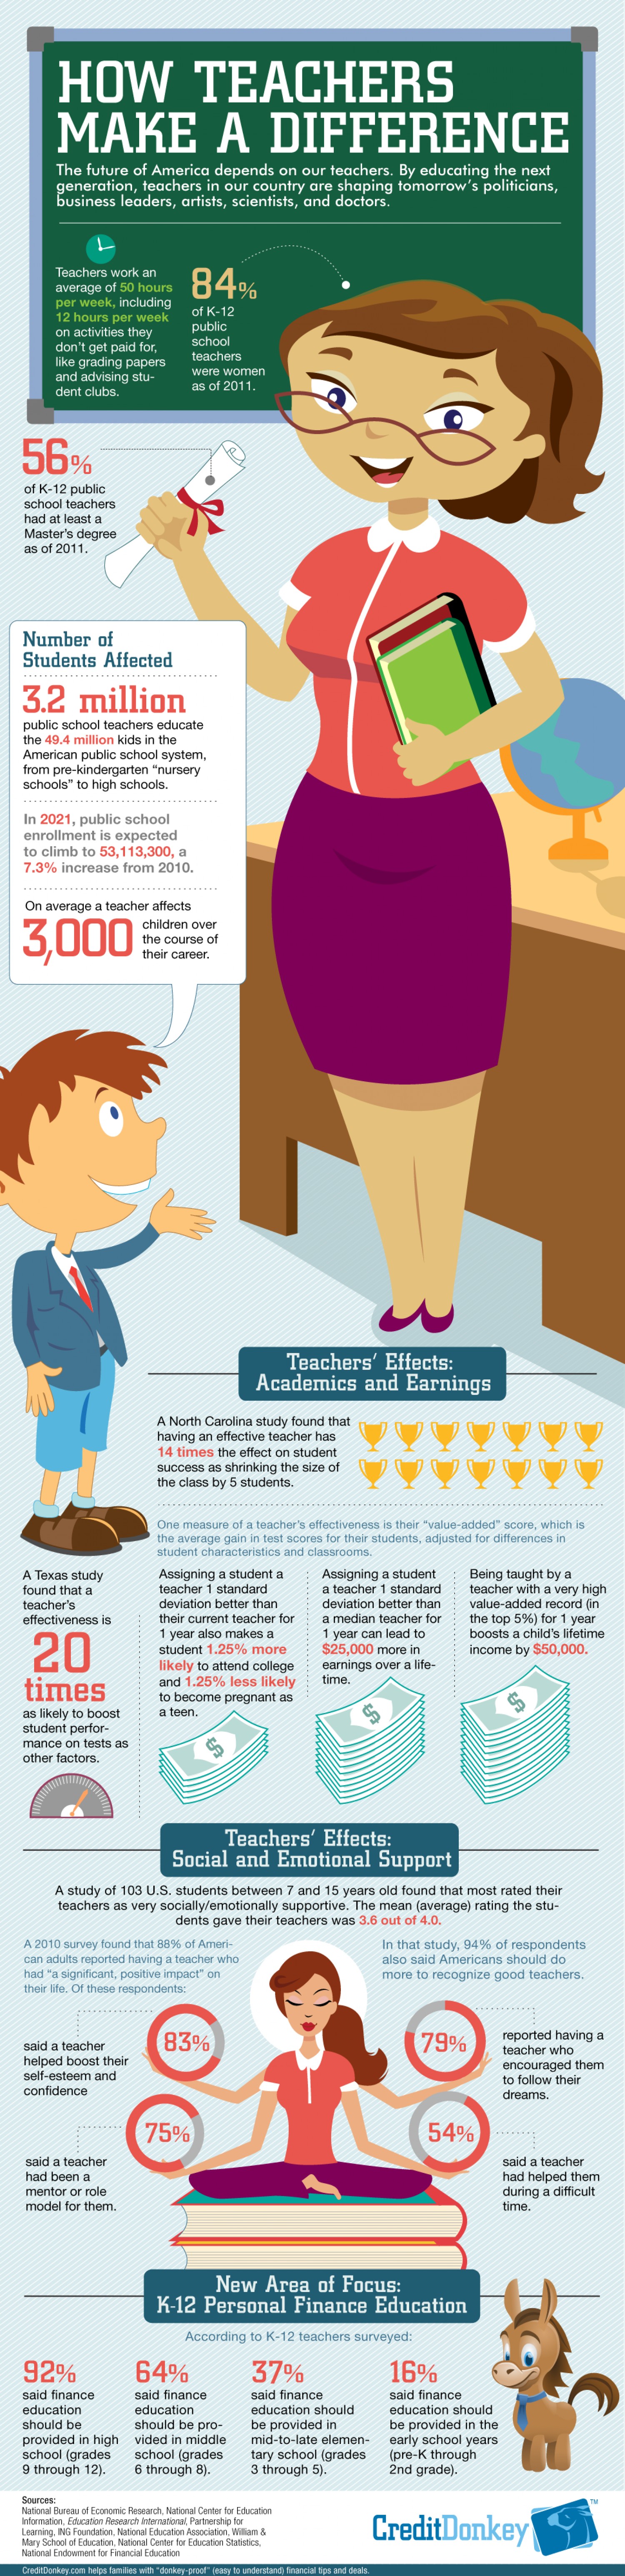 How teachers make a difference